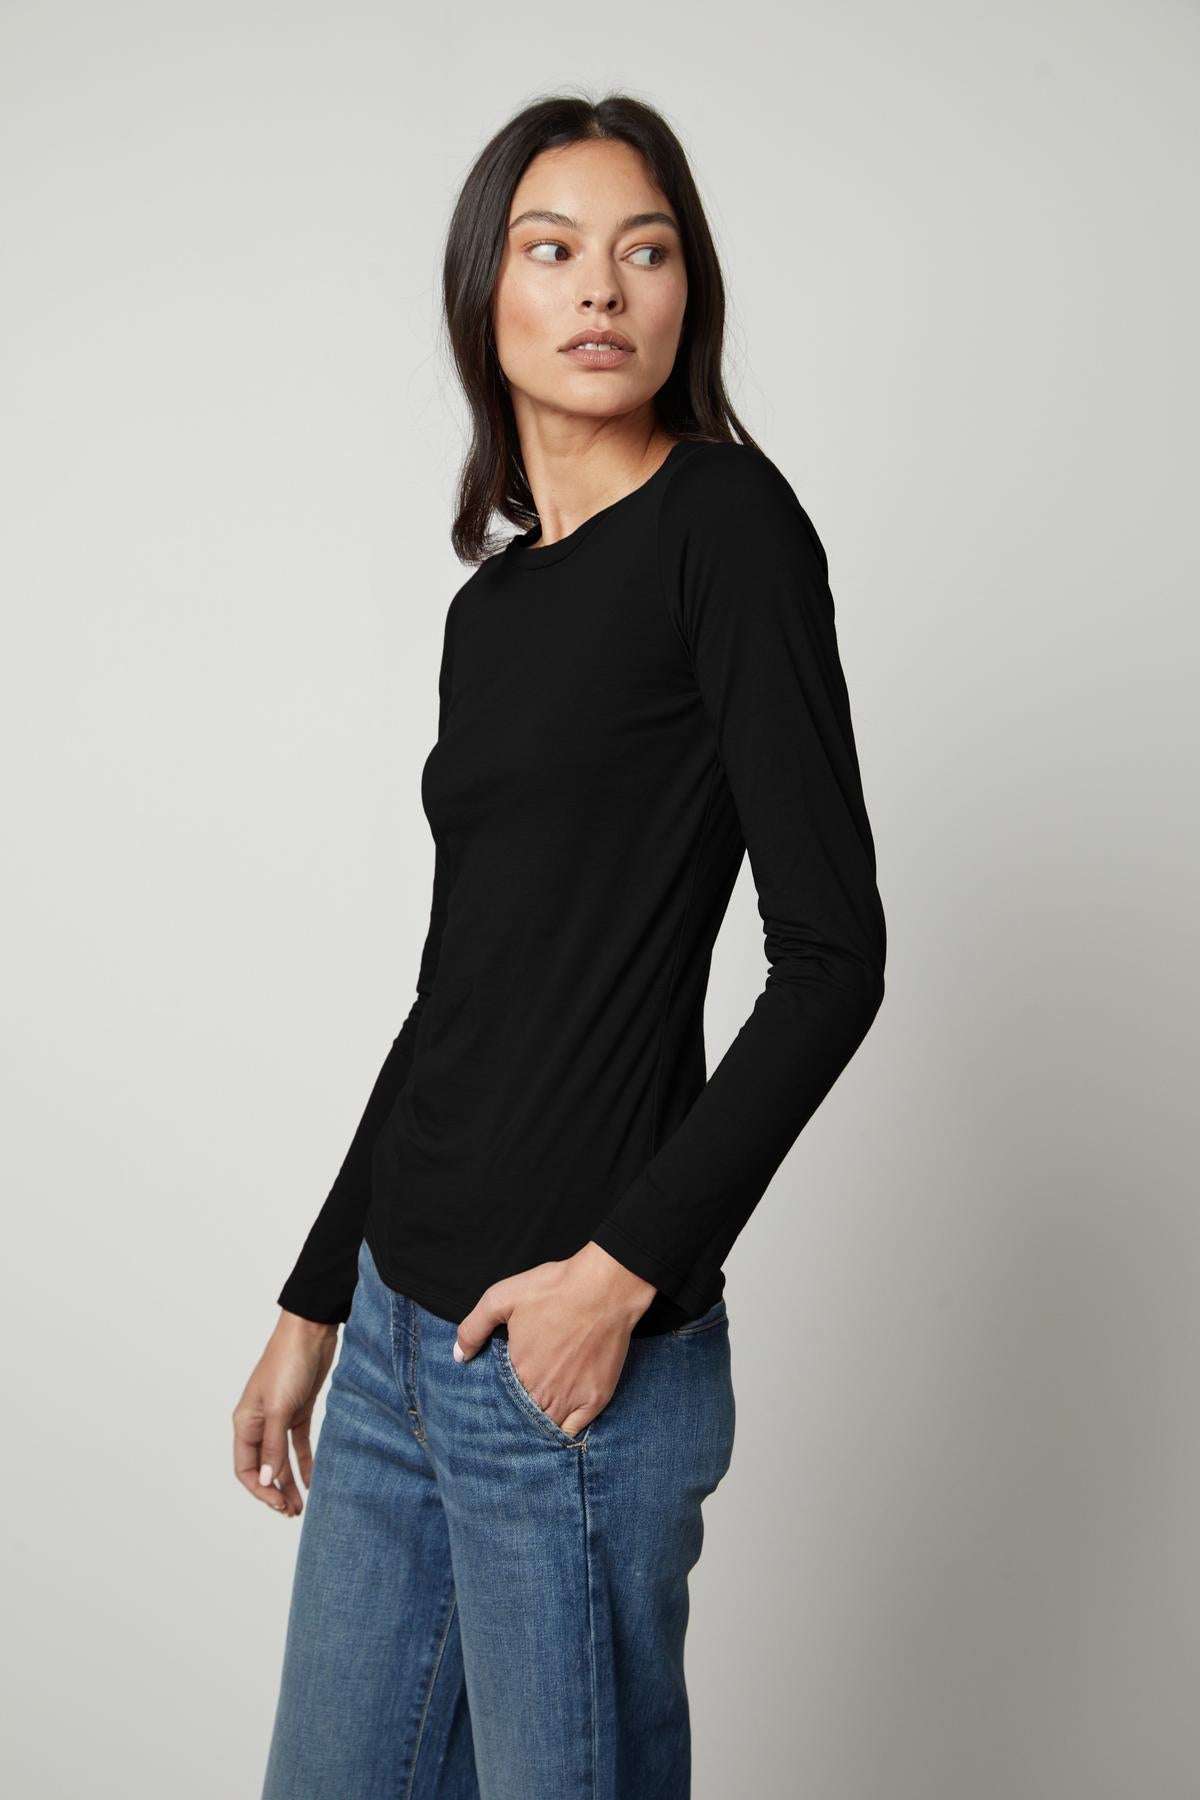 A woman in a ZOFINA GAUZY WHISPER FITTED CREW NECK TEE by Velvet by Graham & Spencer and jeans.-35503491154113